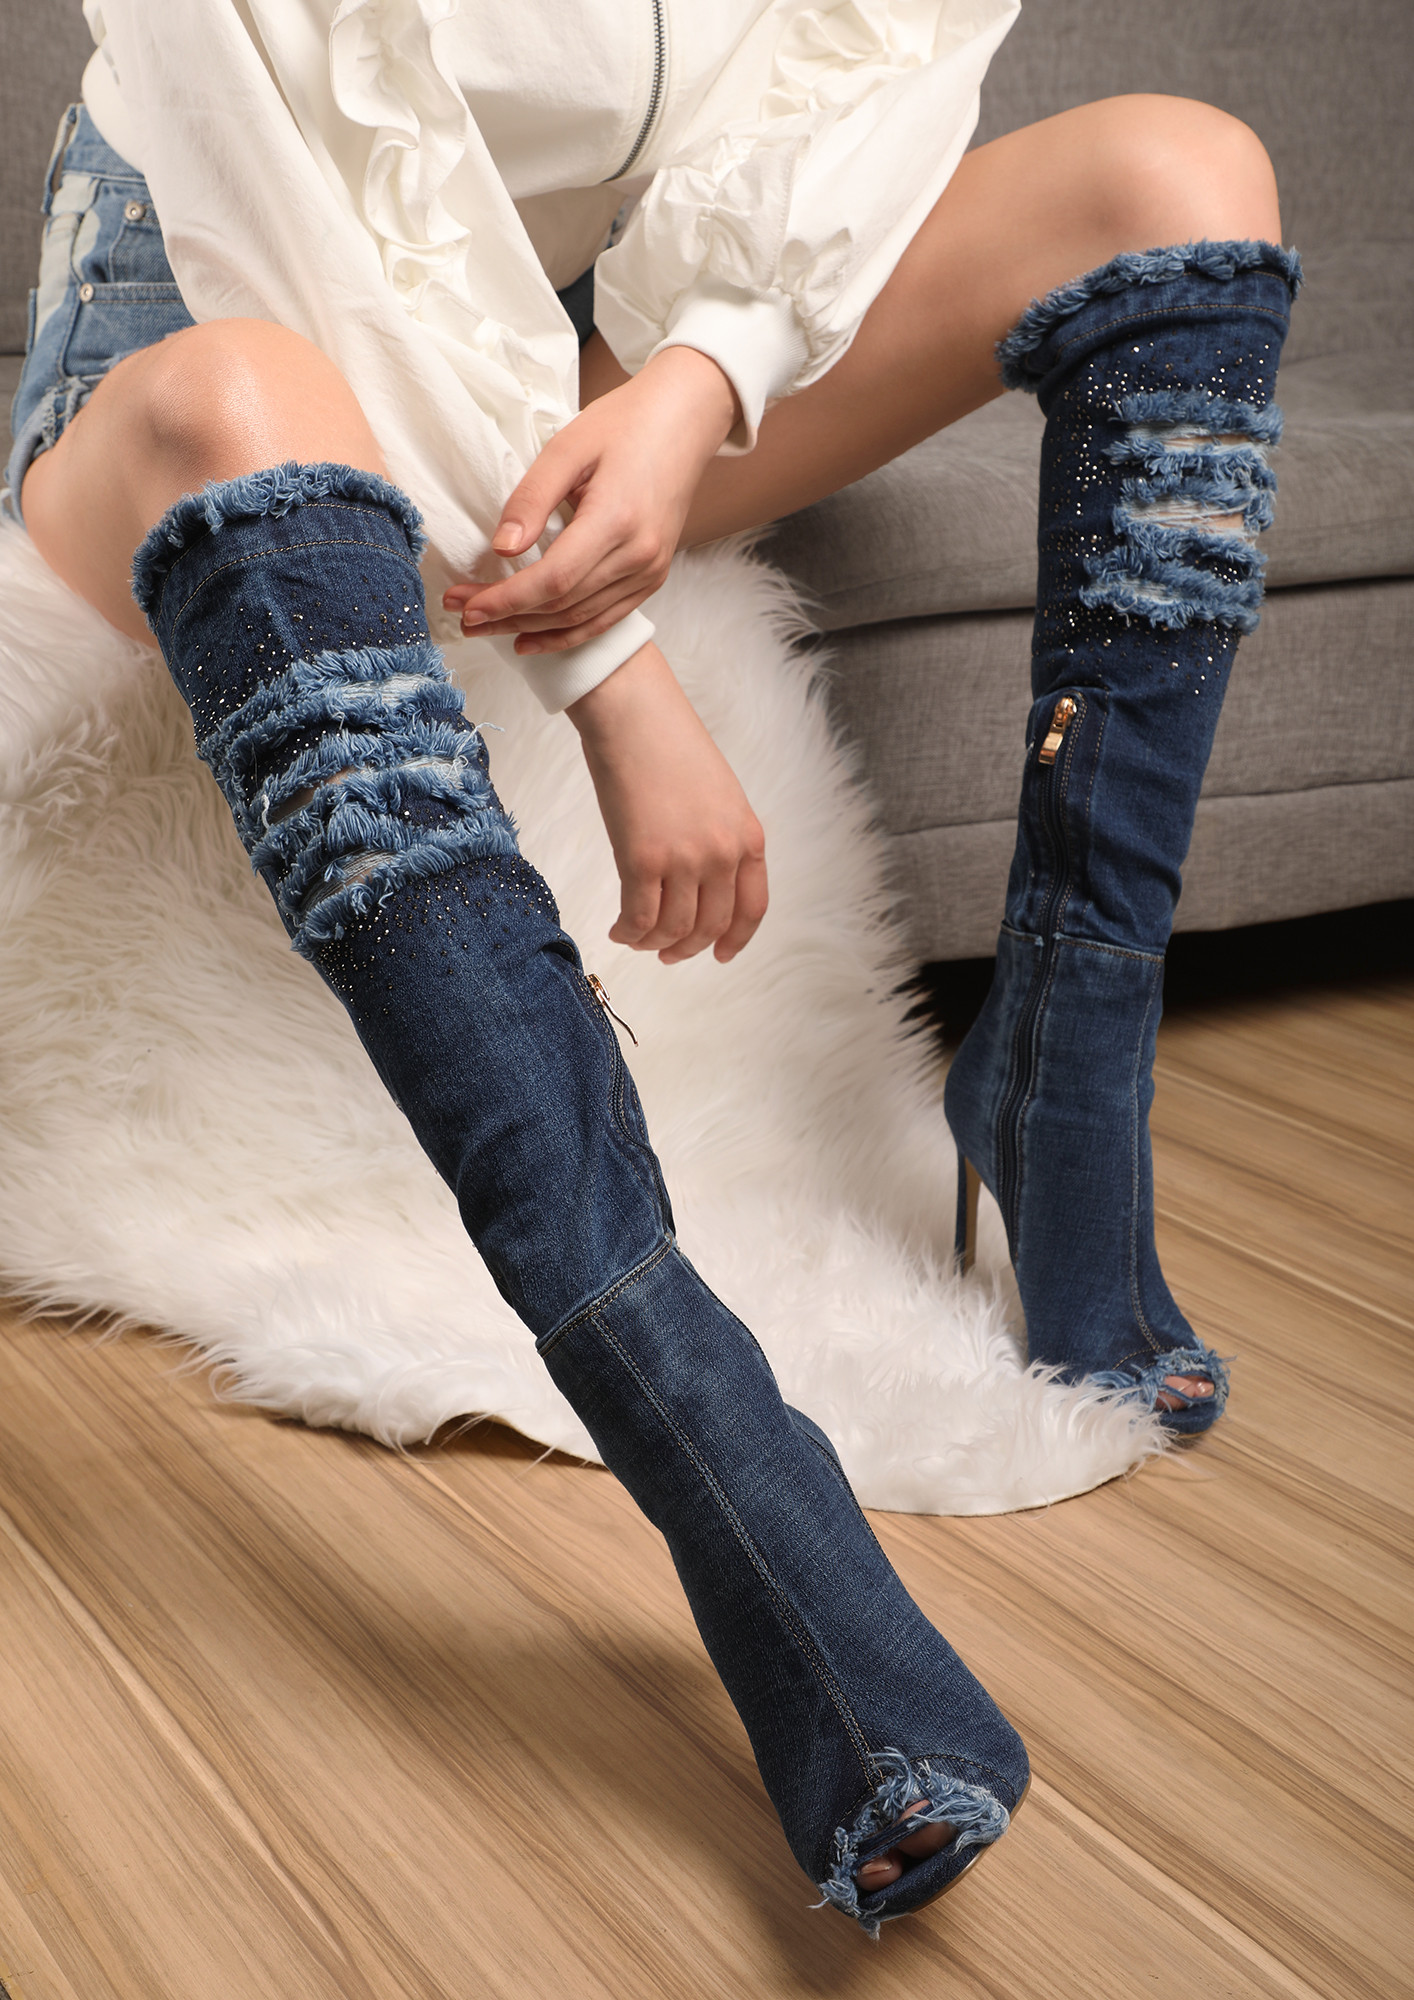 WALK WITH THE SEQUINS DENIM BOOTS